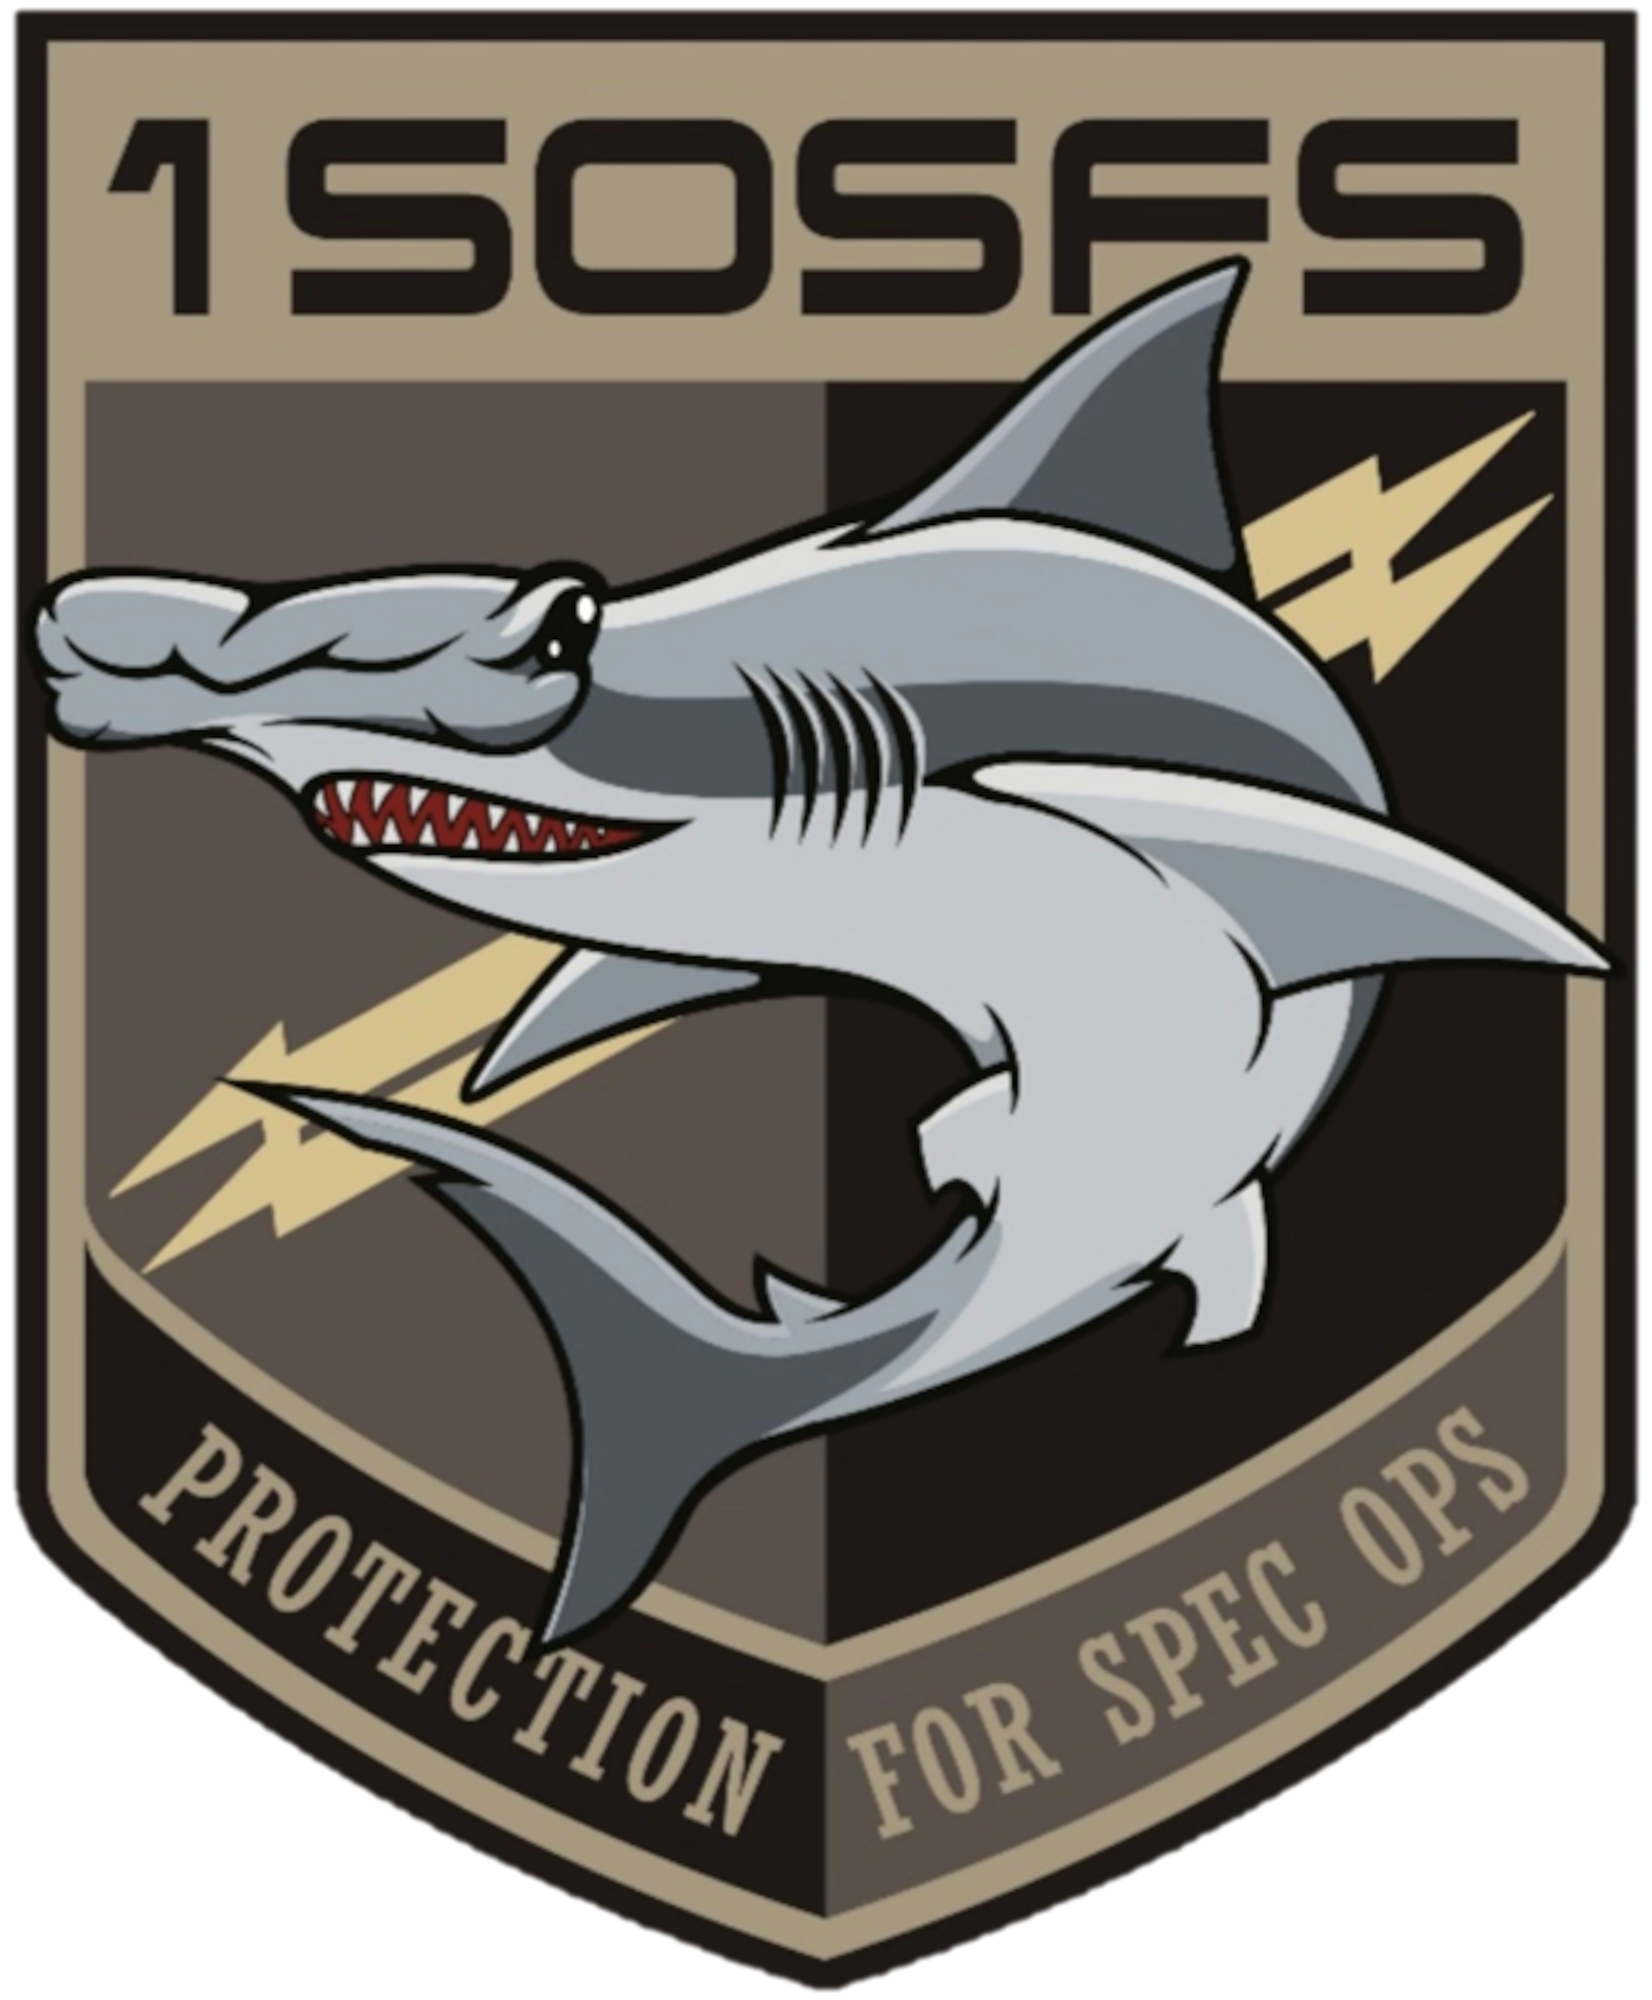 1 SOSFS patch featuring hammerhead shark, the unit mascot, and bottom text "Protection for spec ops".